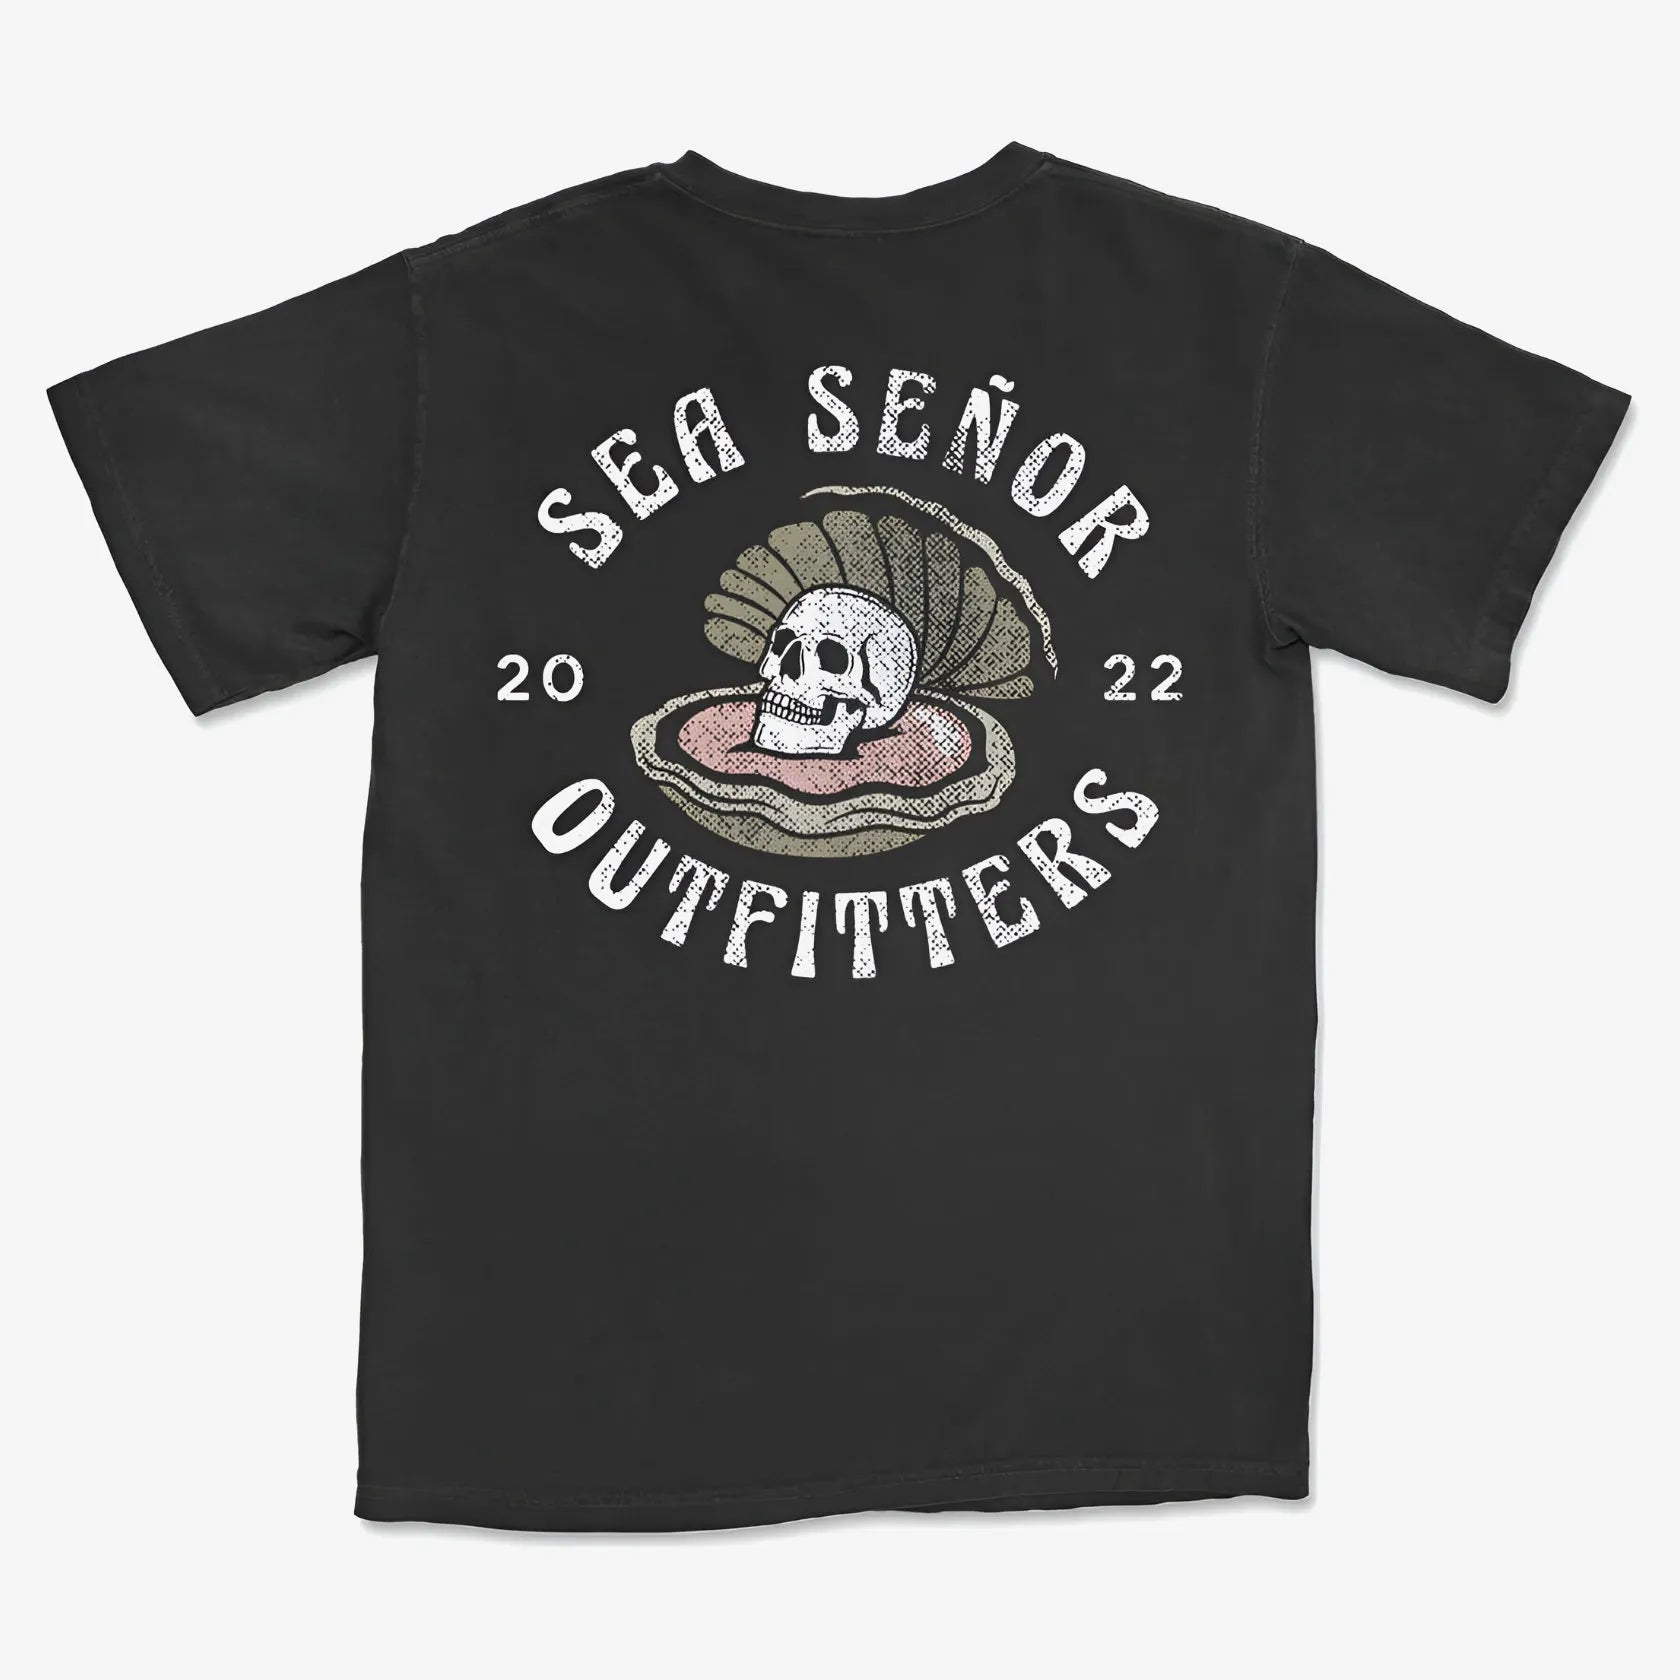 Pearl - Pocket - Sea Señor Outfitters